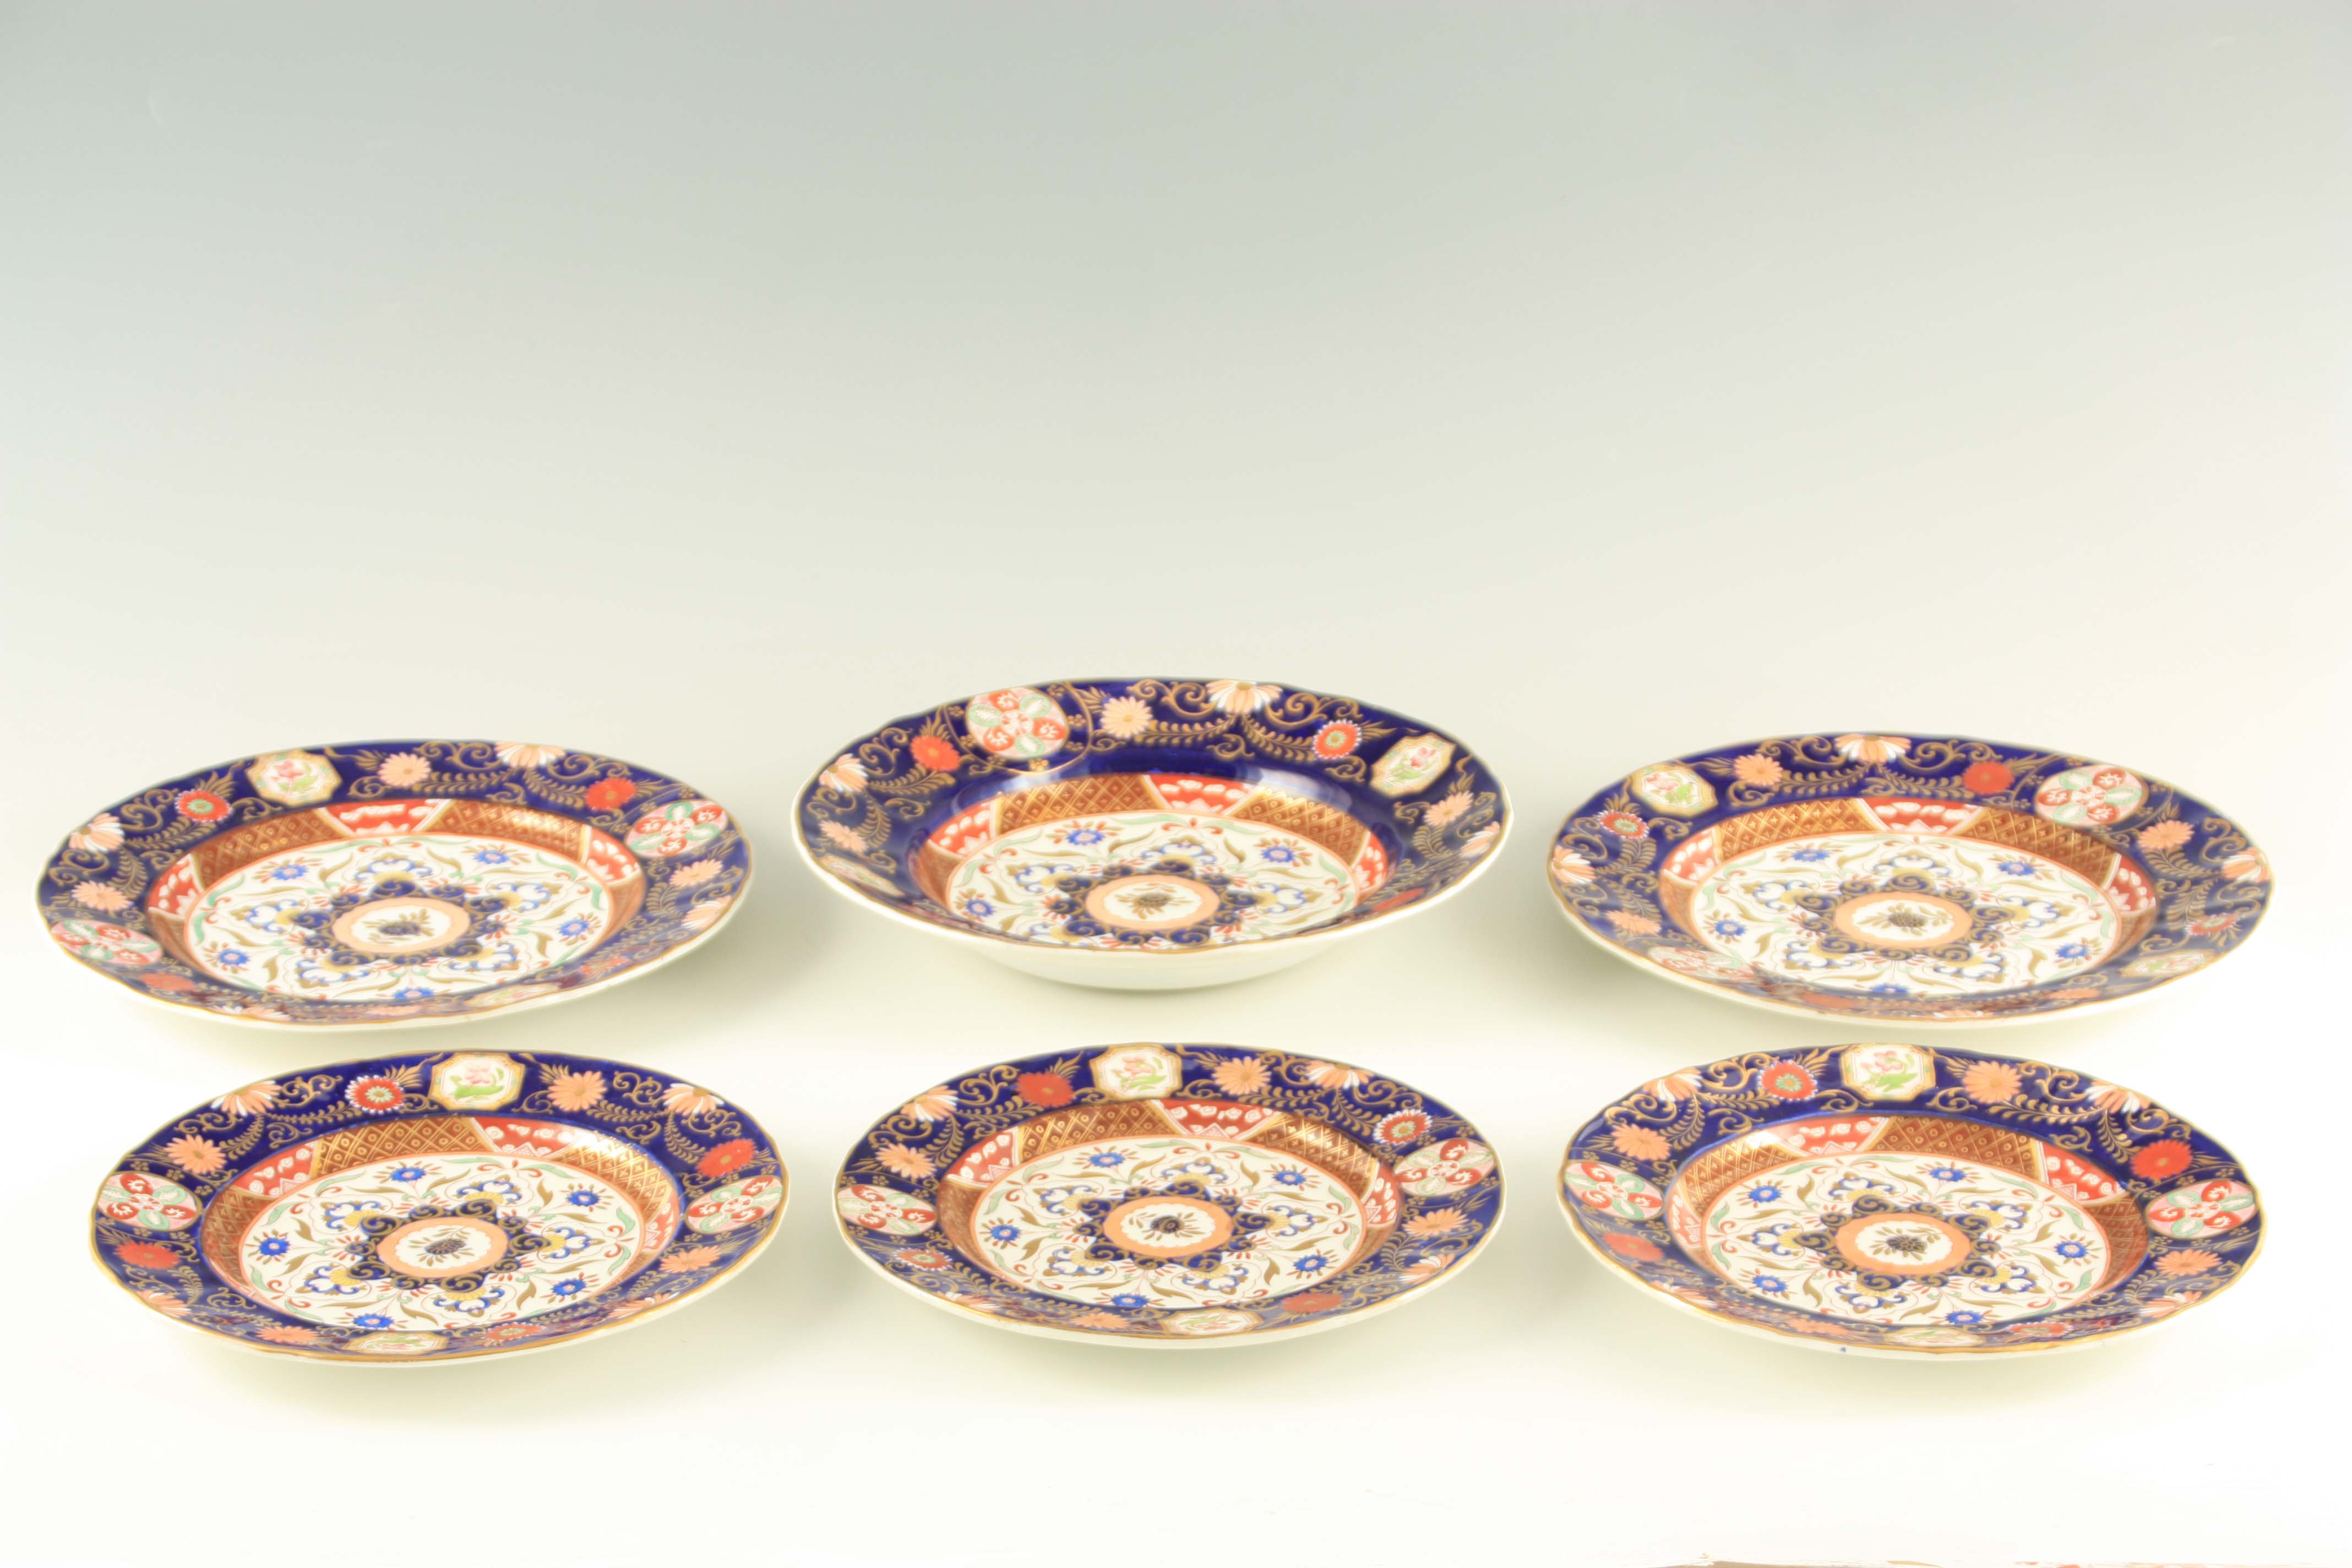 A 19TH CENTURY ASHWORTH BROs REAL IRONSTONE CHINA PART DINNER SERVICE comprising five plates of - Image 6 of 8